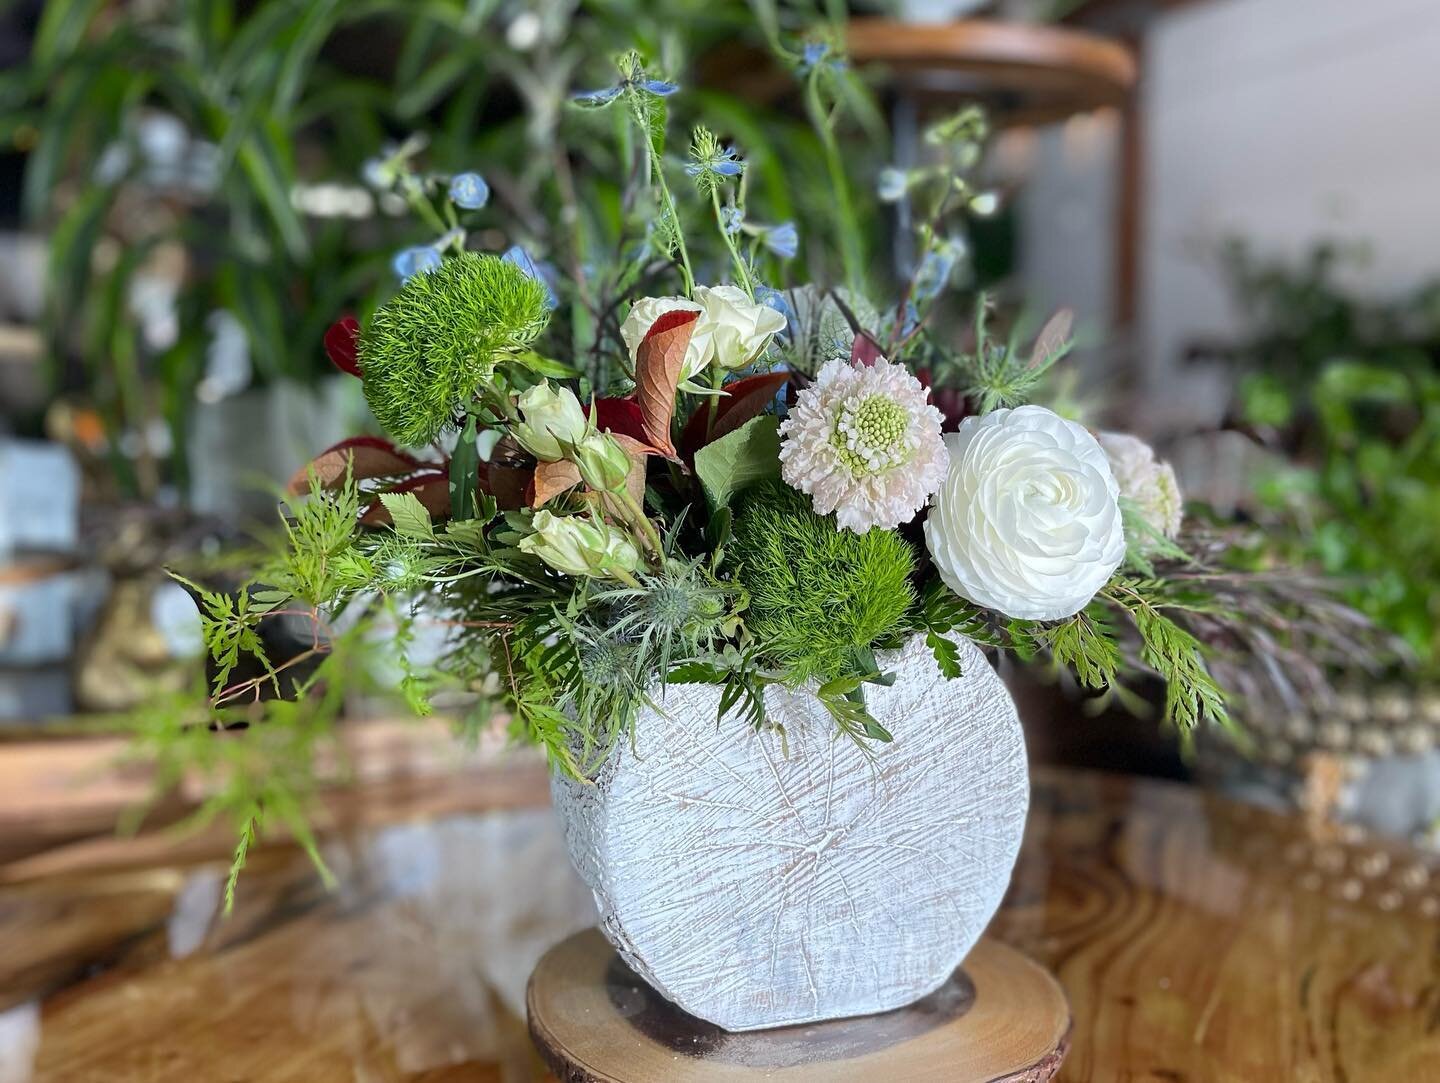 Fall florals don&rsquo;t always have to be warm tones and earthy, change it up with something soft and simple! 

#snohomishflorist #freshflowers #localdeliveries #snohomish #birthdays #anniversary #sympathy #getwell #fallfloralarrangements #ordernow